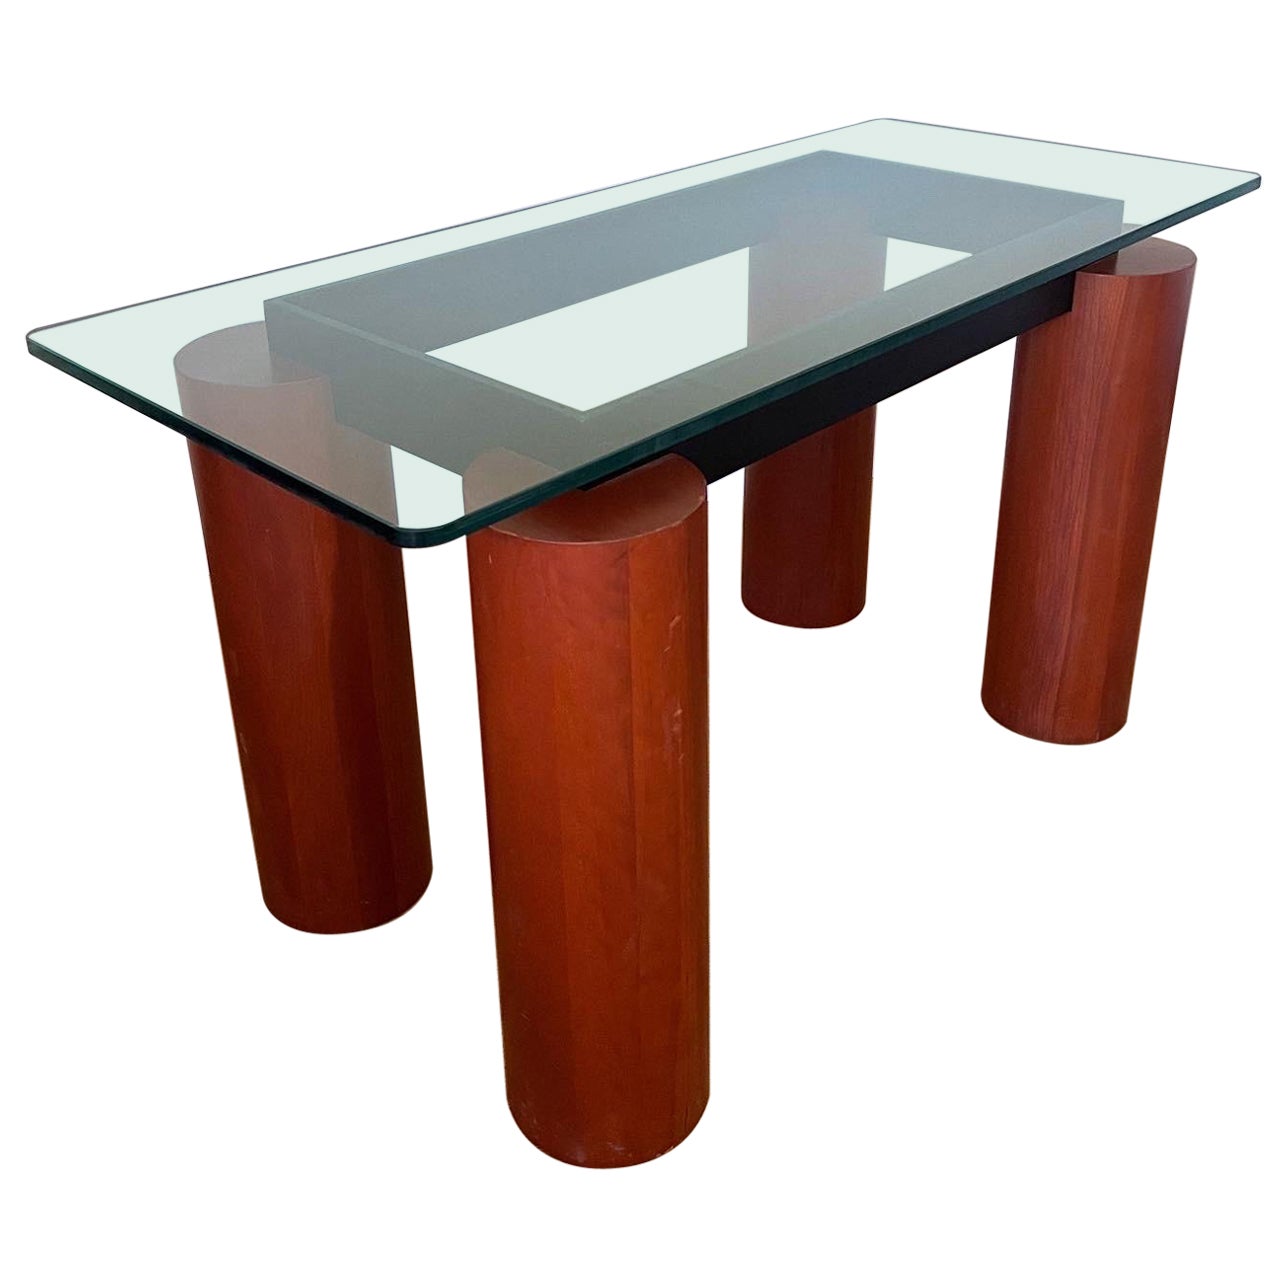 Postmodern Console Table in the Style of Lela & Massimo Vignelli’s “Serenissimo”